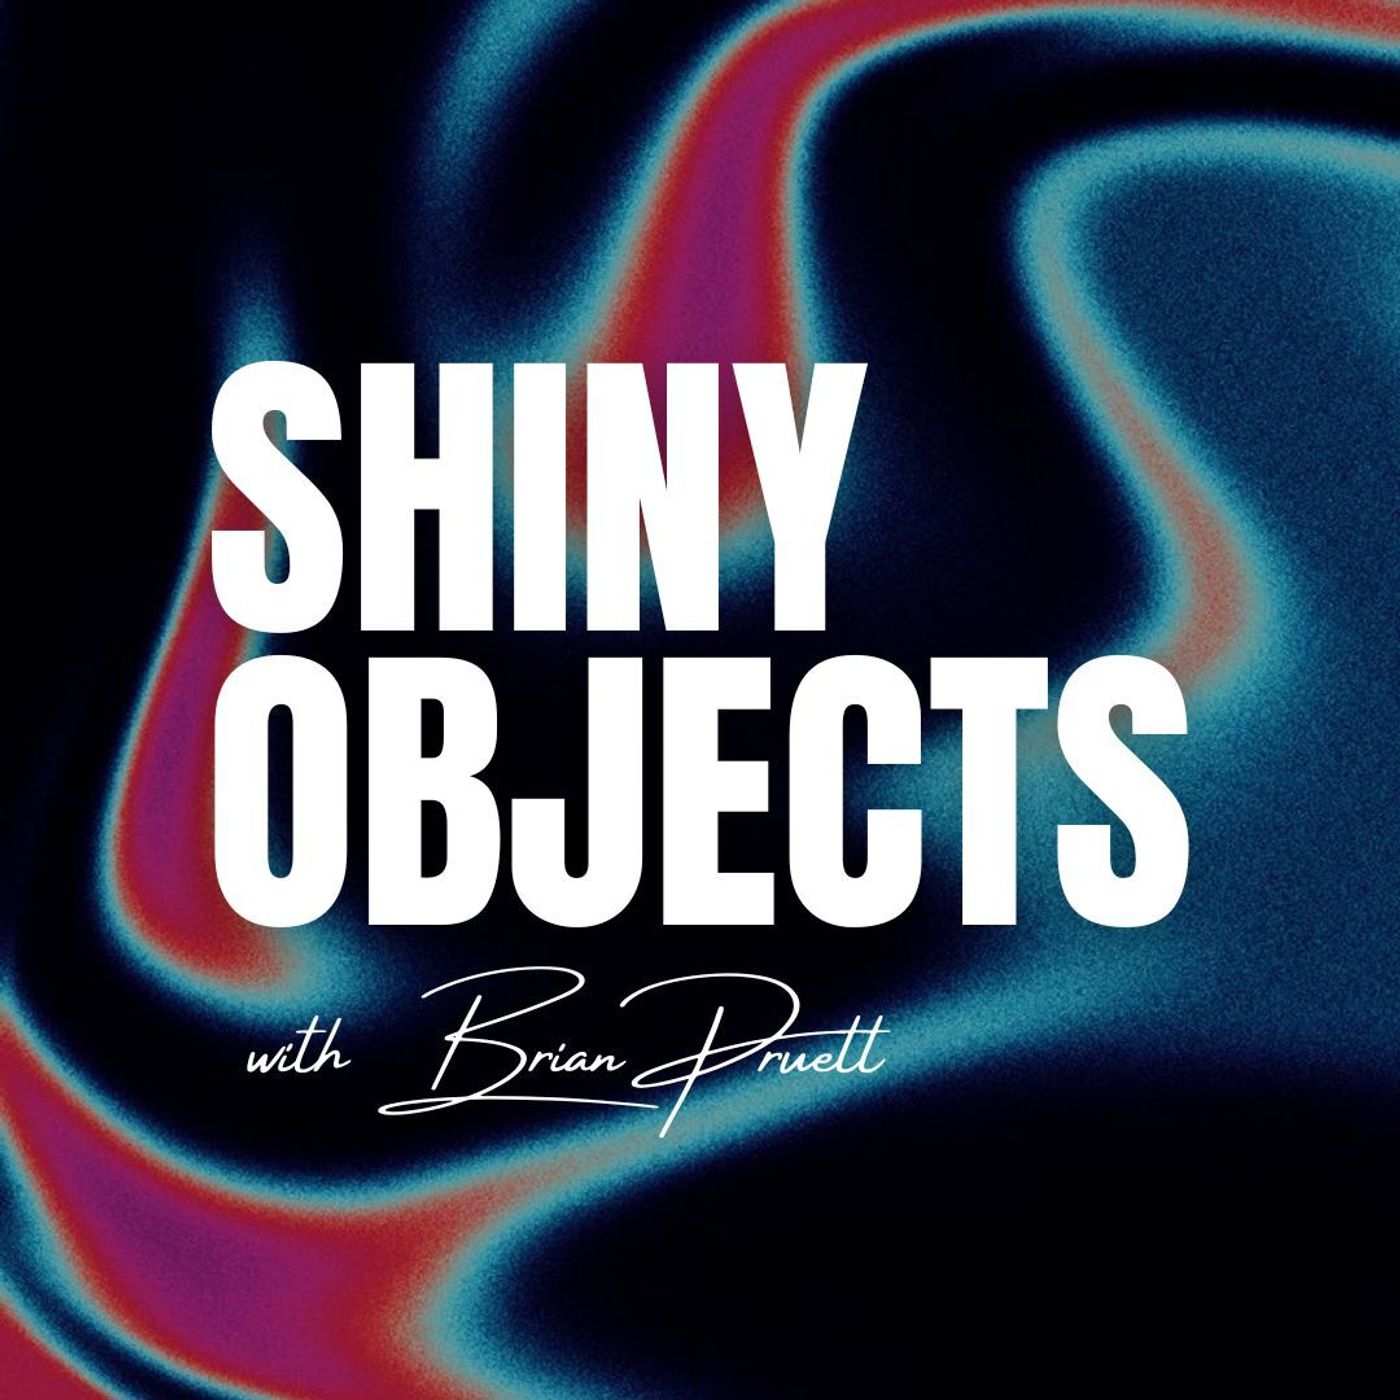 34: How to Avoid "Shiny Object Syndrome"